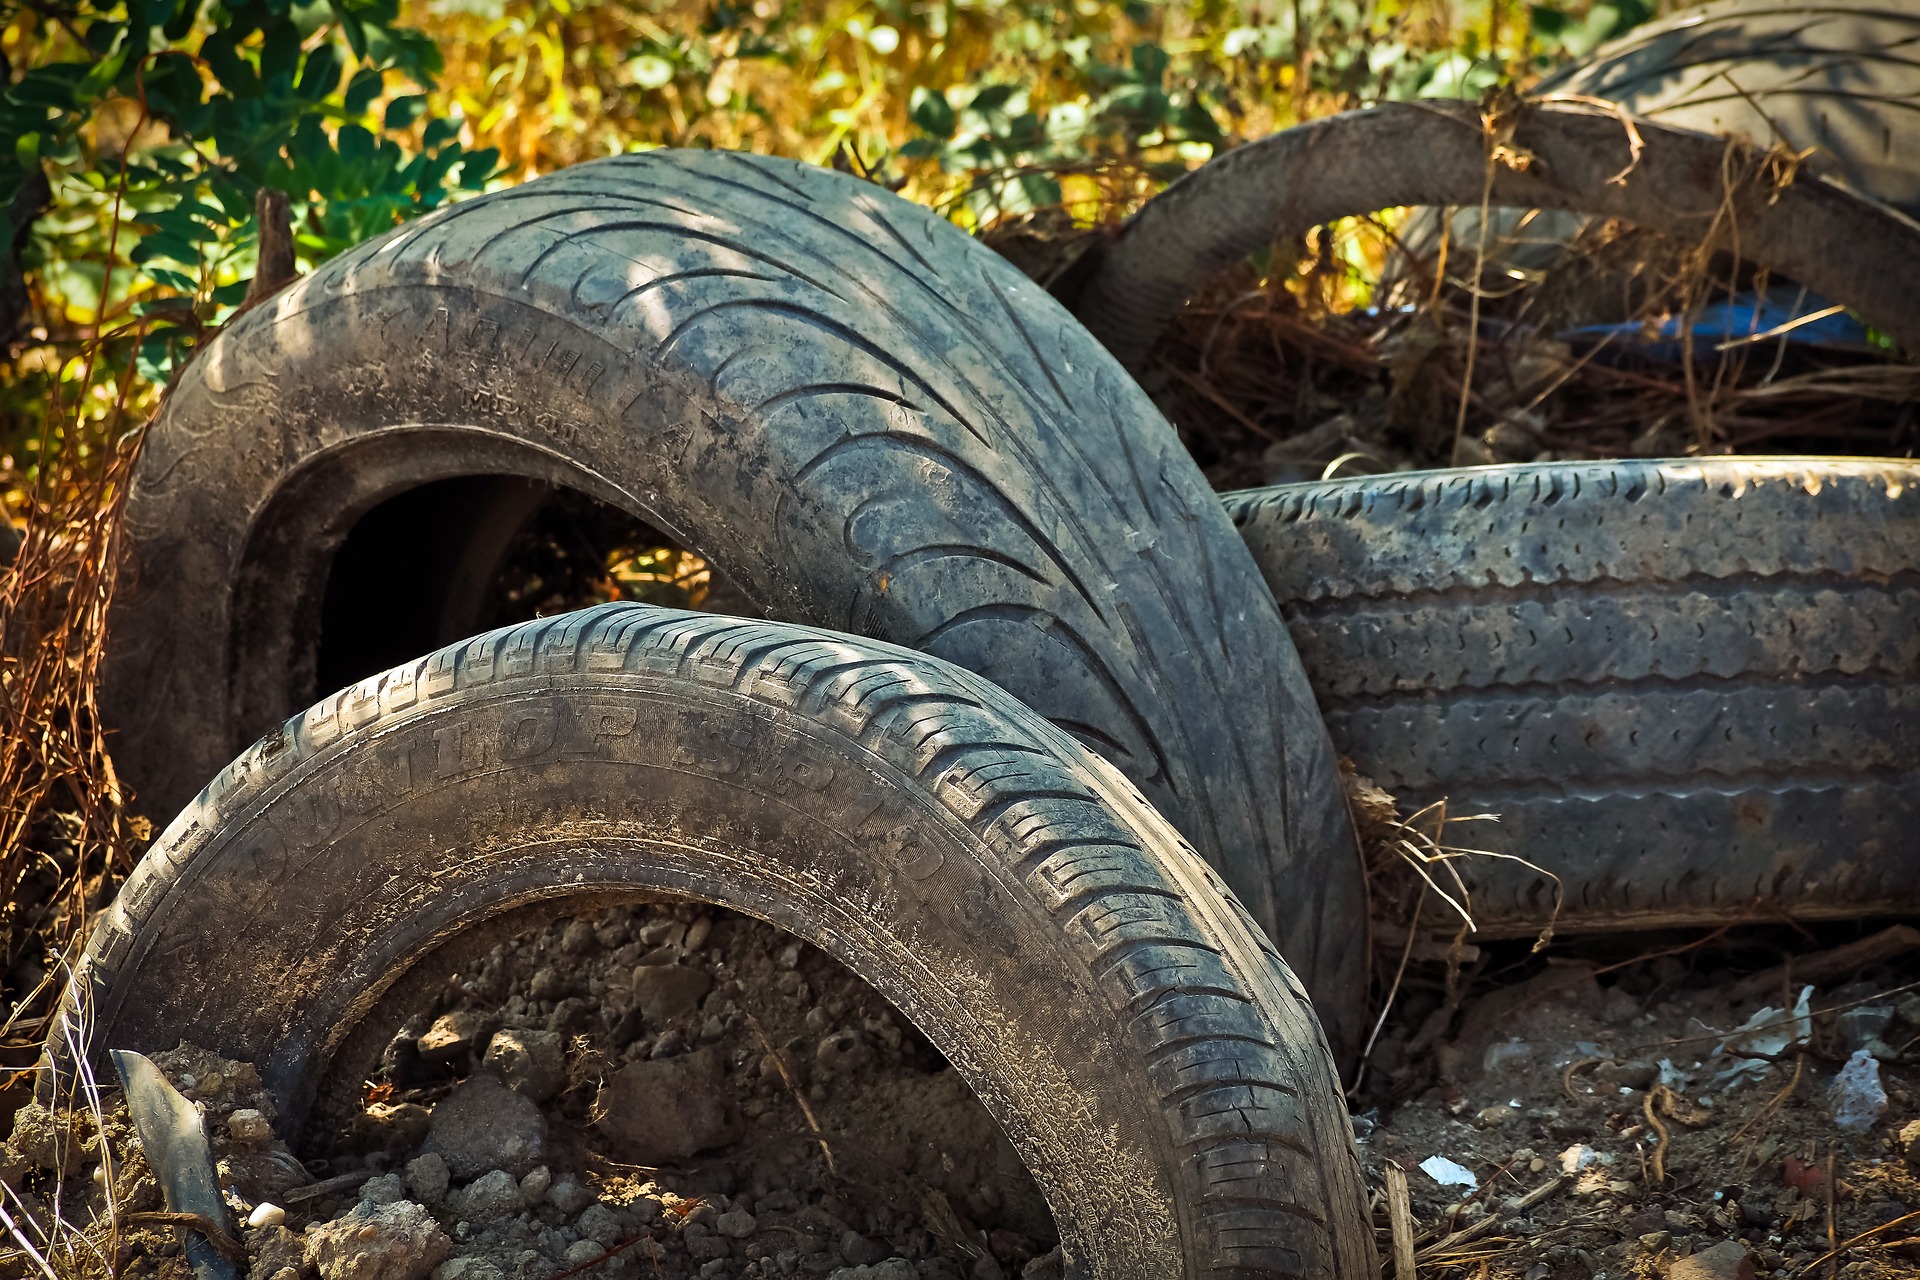 TIA and USTMA found Tire Recycling Foundation